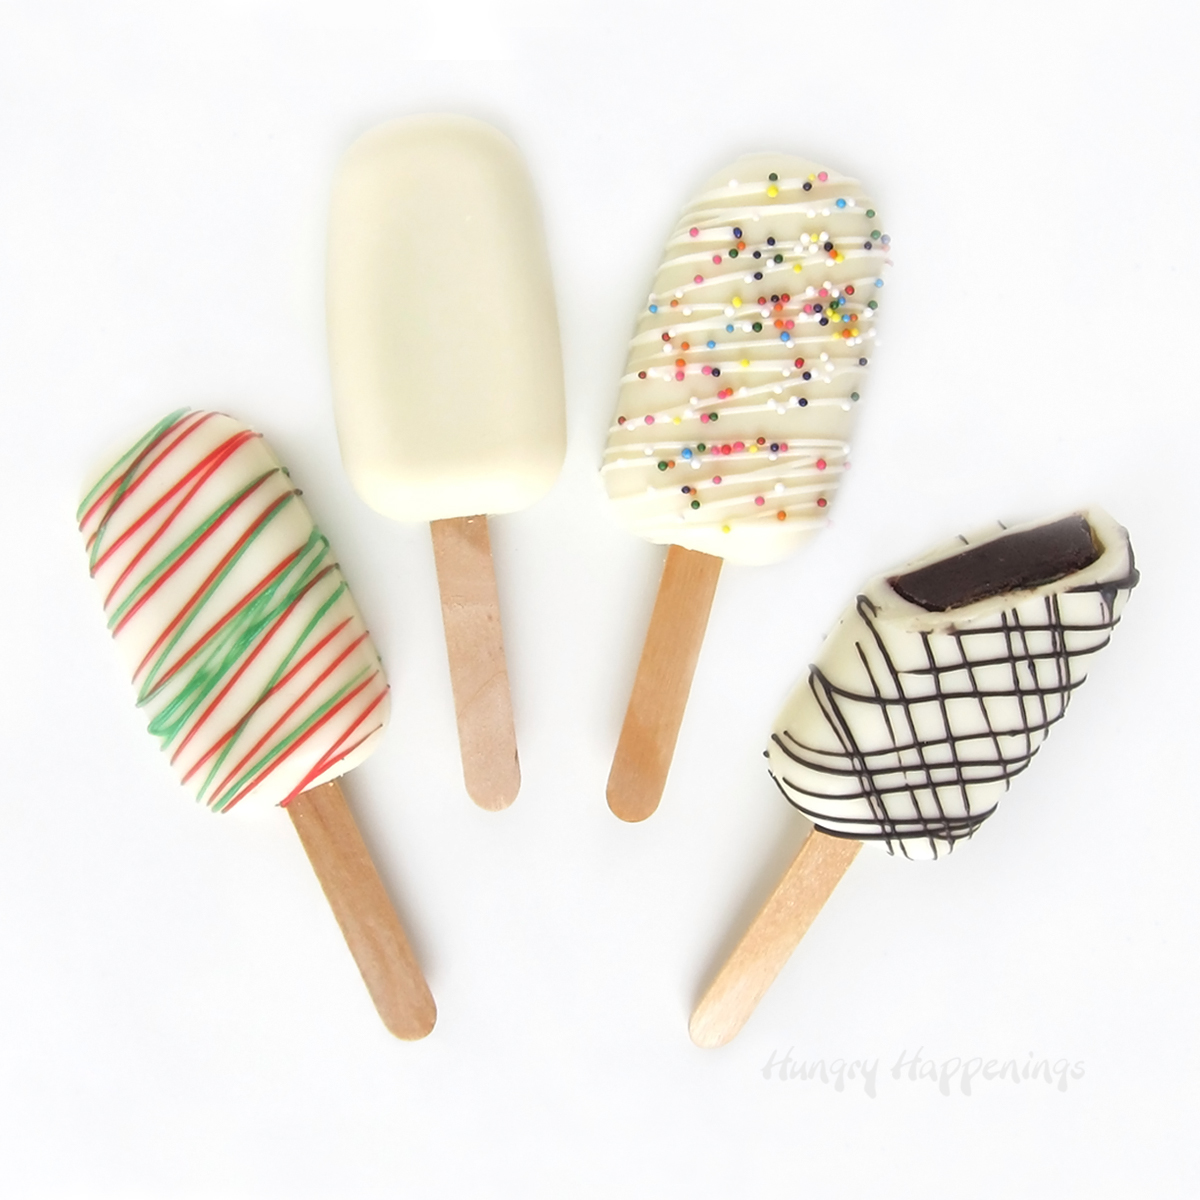 How to make Cakesicles (cake pop popsicles)